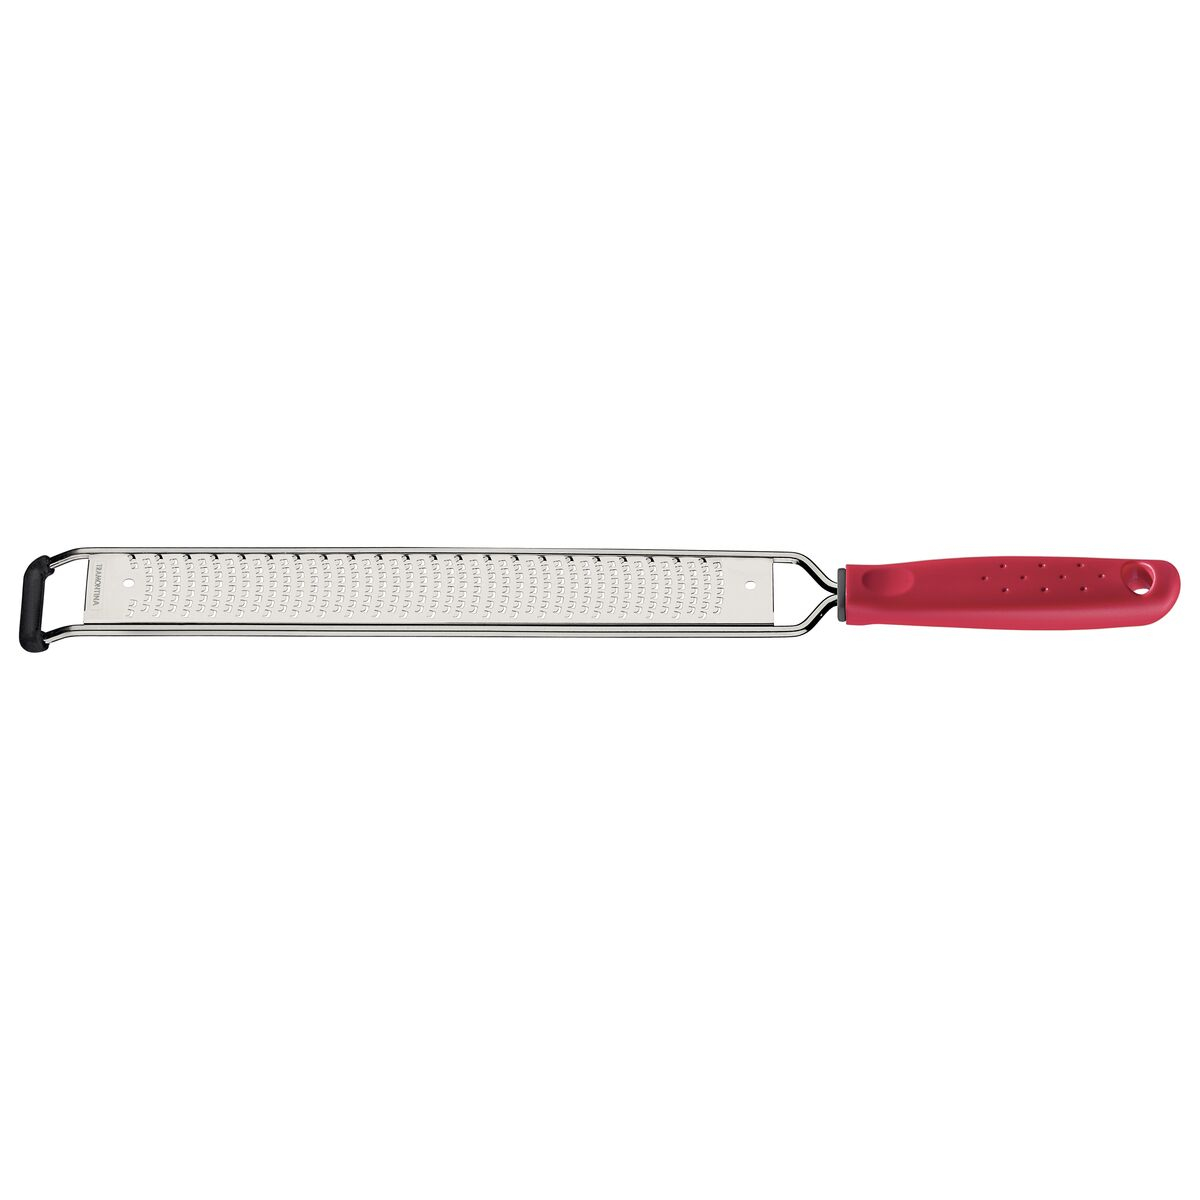 Tramontina Utilitá Stainless Steel Grater with Polypropylene Handle and Red Nonslip Rubber Base